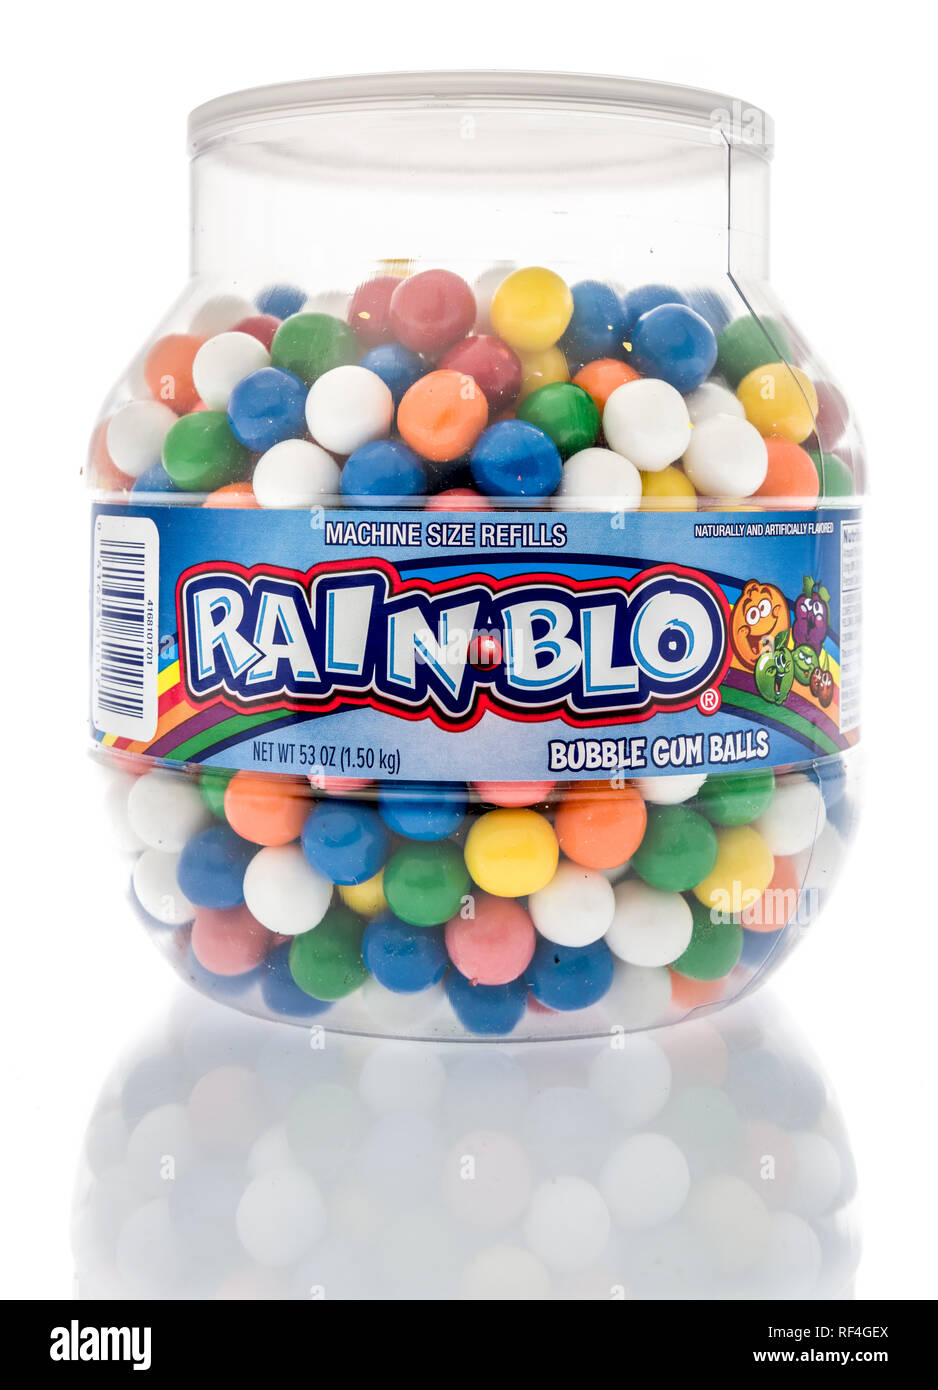 Winneconne, WI - 11 January 2019:  A package of Rain-blo bubble gum balls on an isolated background. Stock Photo